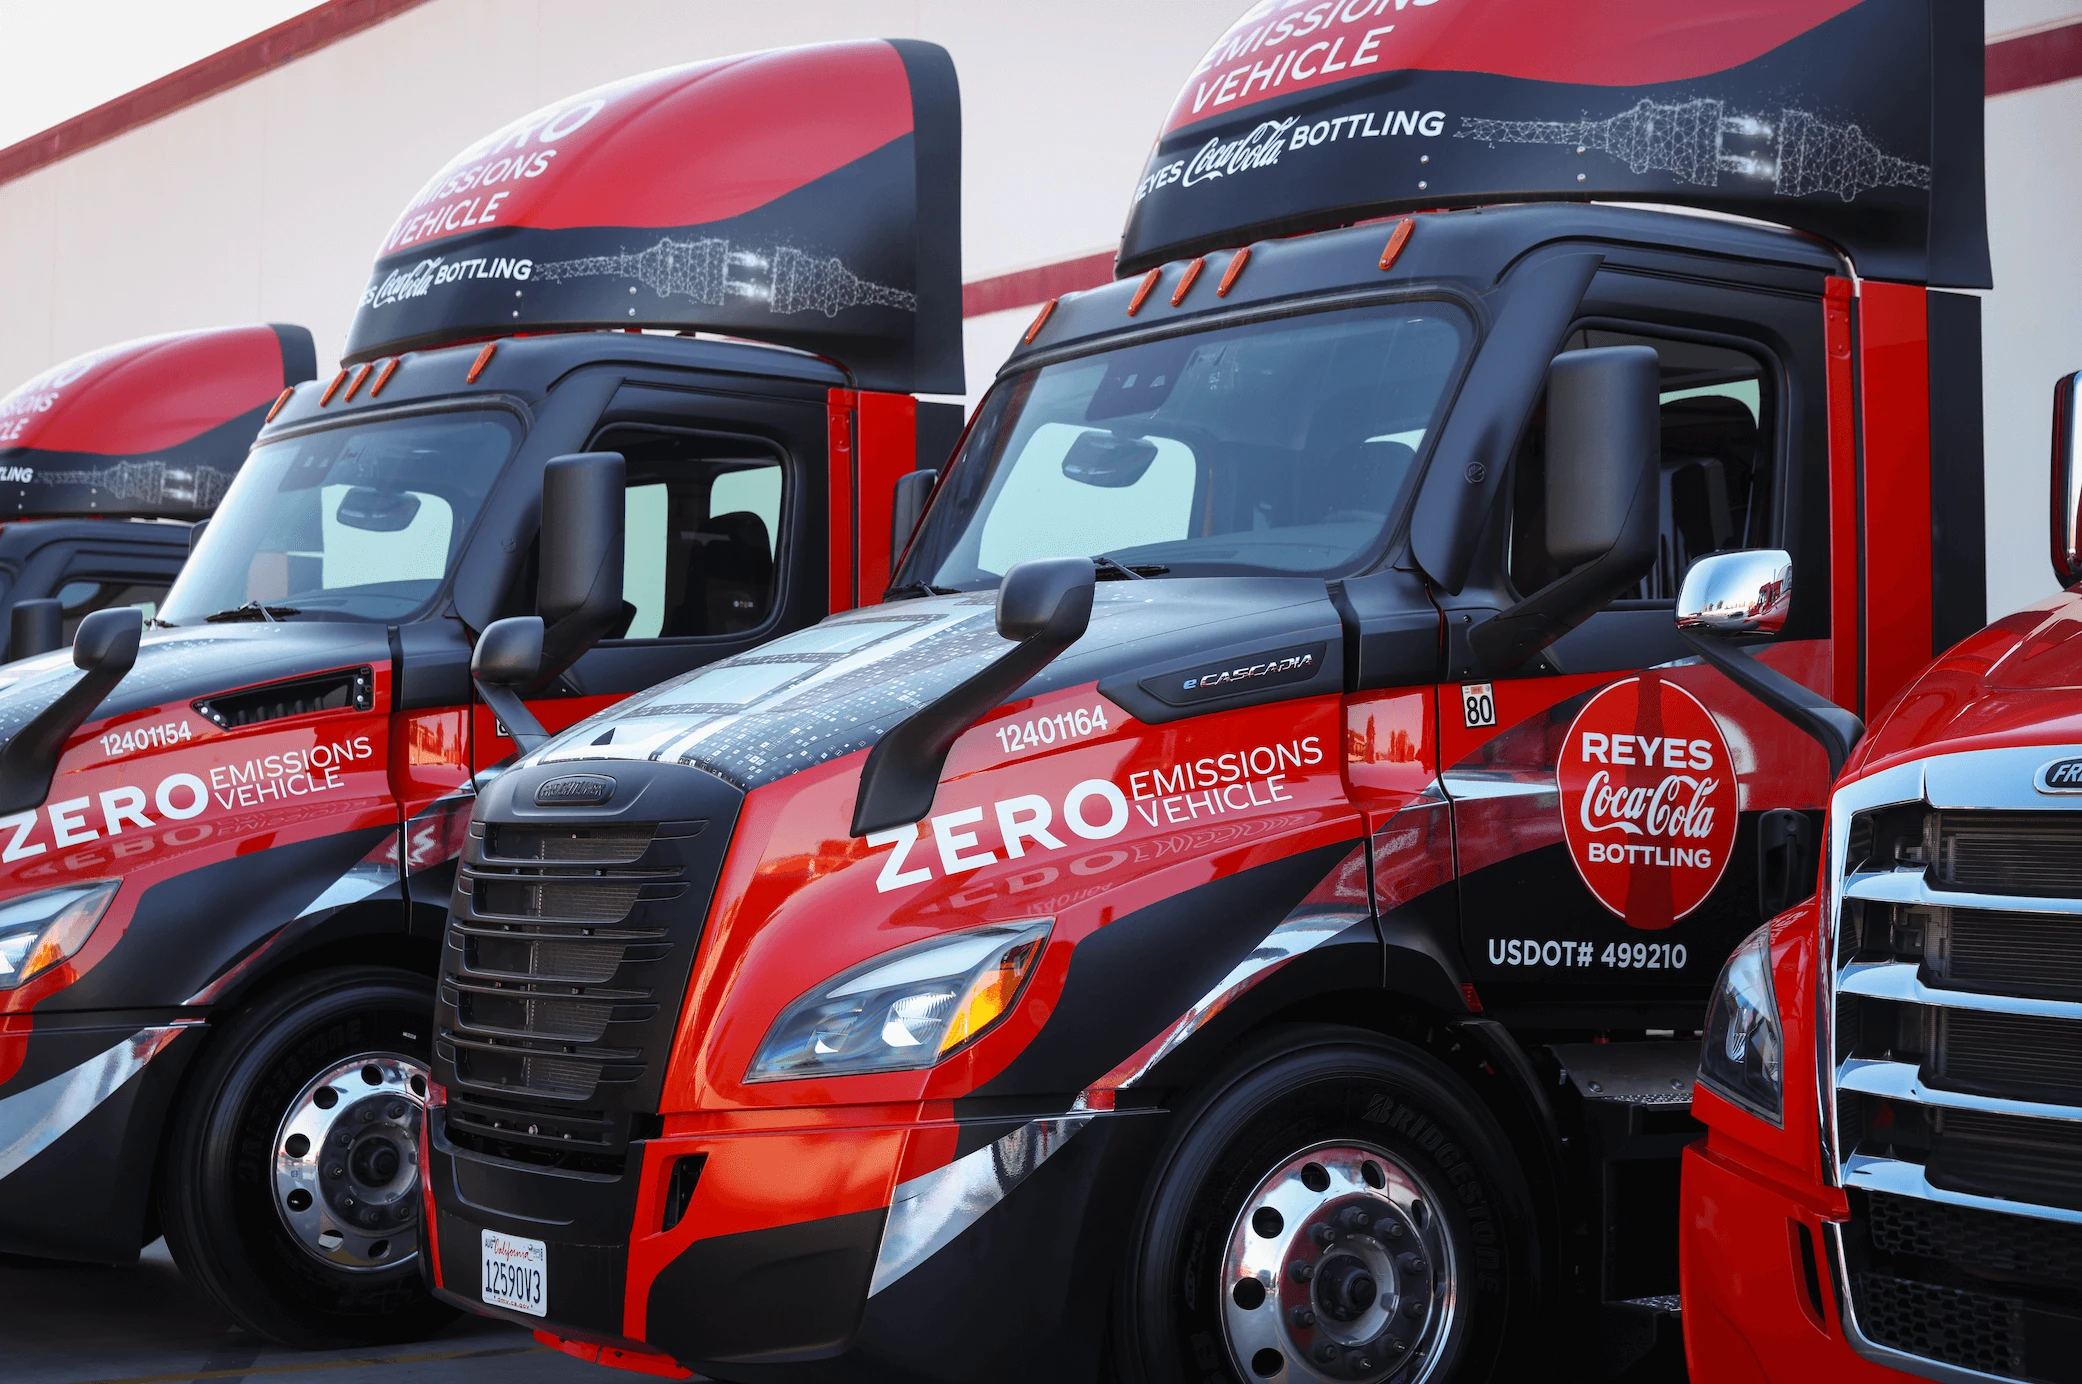 A group of "RCCB Zero Emissions" trucks parked in front of a warehouse building